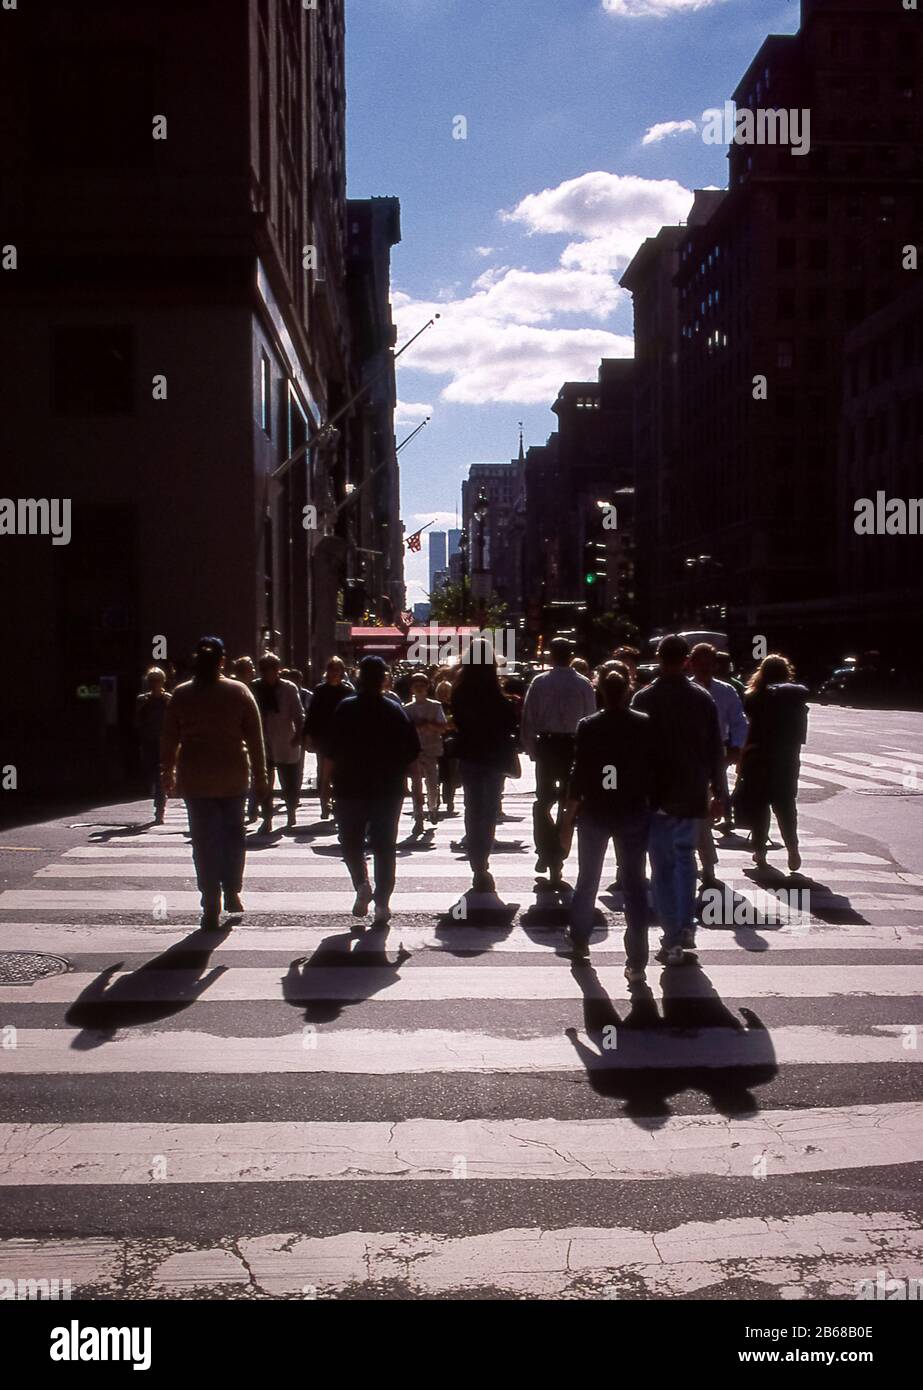 Shadows of people walking across a zebra crossing with the World Trade Center buildings in the distance, New York City, USA, 1998 Stock Photo